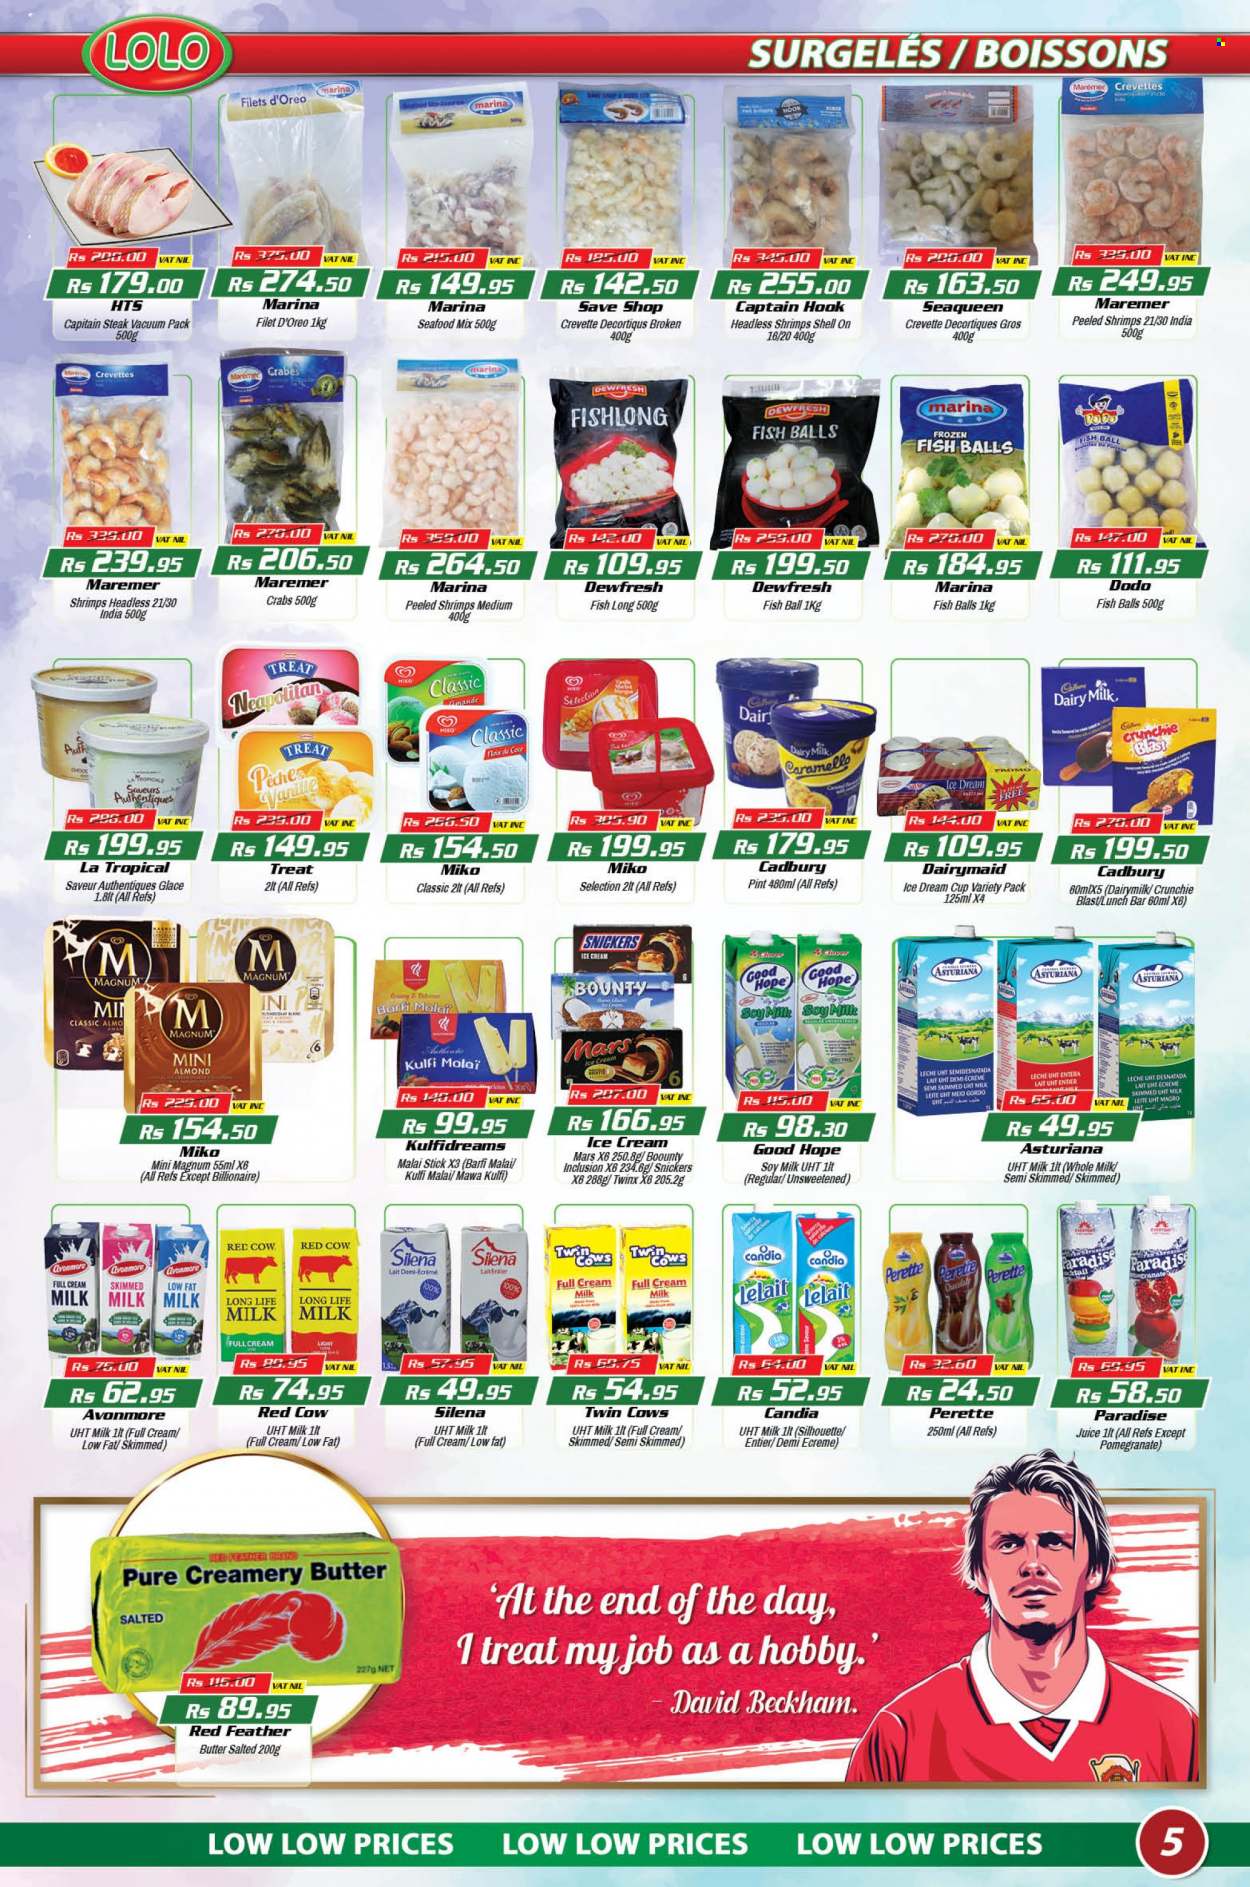 thumbnail - LOLO Hyper Catalogue - 25.11.2022 - 14.12.2022 - Sales products - pomegranate, seafood, crab, shrimps, soy milk, long life milk, butter, Magnum, ice cream, Snickers, Bounty, Mars, Cadbury, Dairy Milk, juice, David Beckham, hook, cup, Hill's, calcium, Oreo, steak. Page 5.